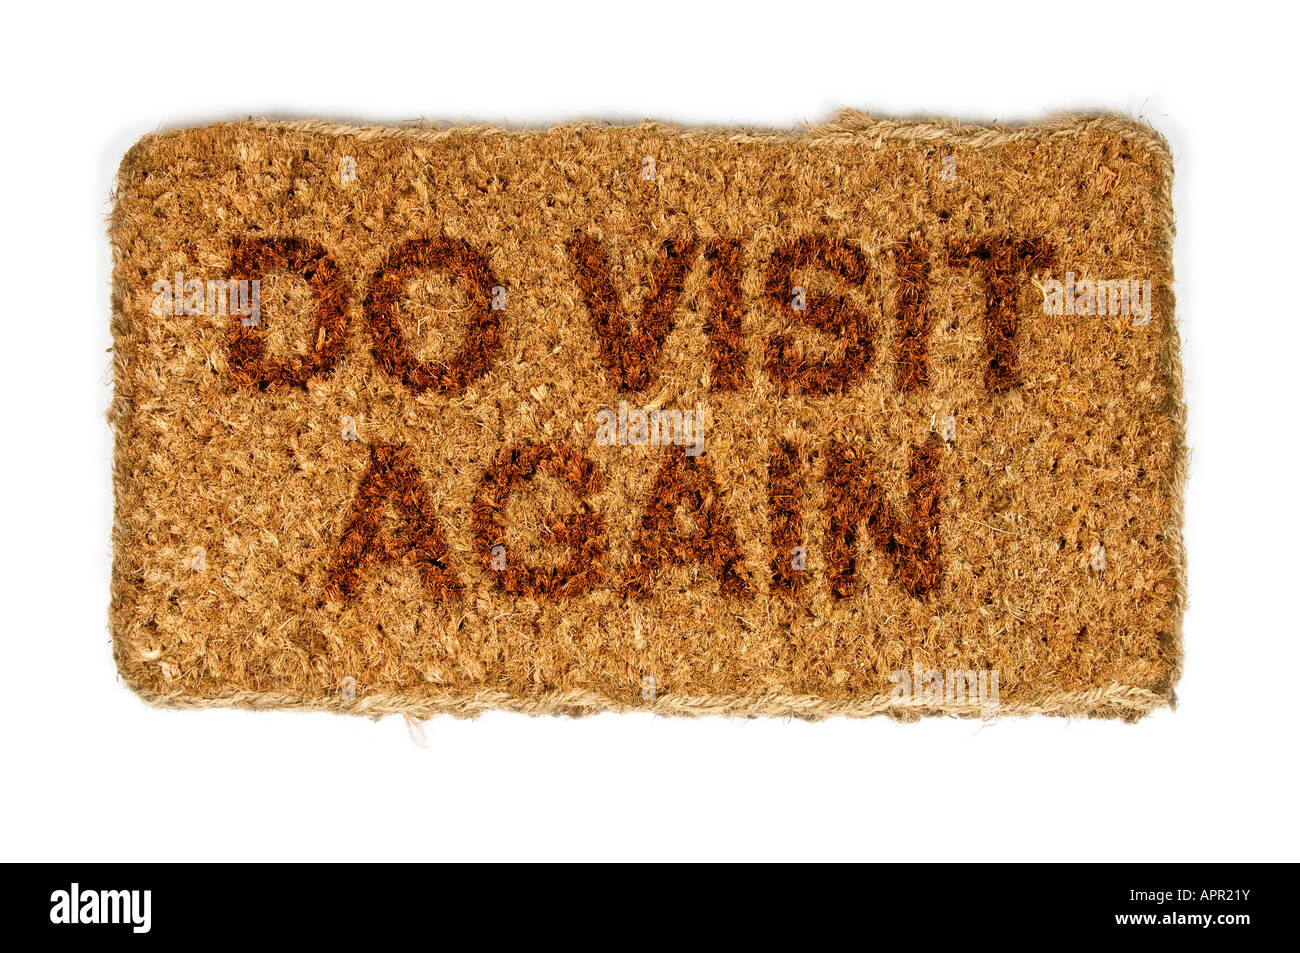 Texture Background Of The Red Plastic Doormat. Stock Photo, Picture and  Royalty Free Image. Image 17275362.